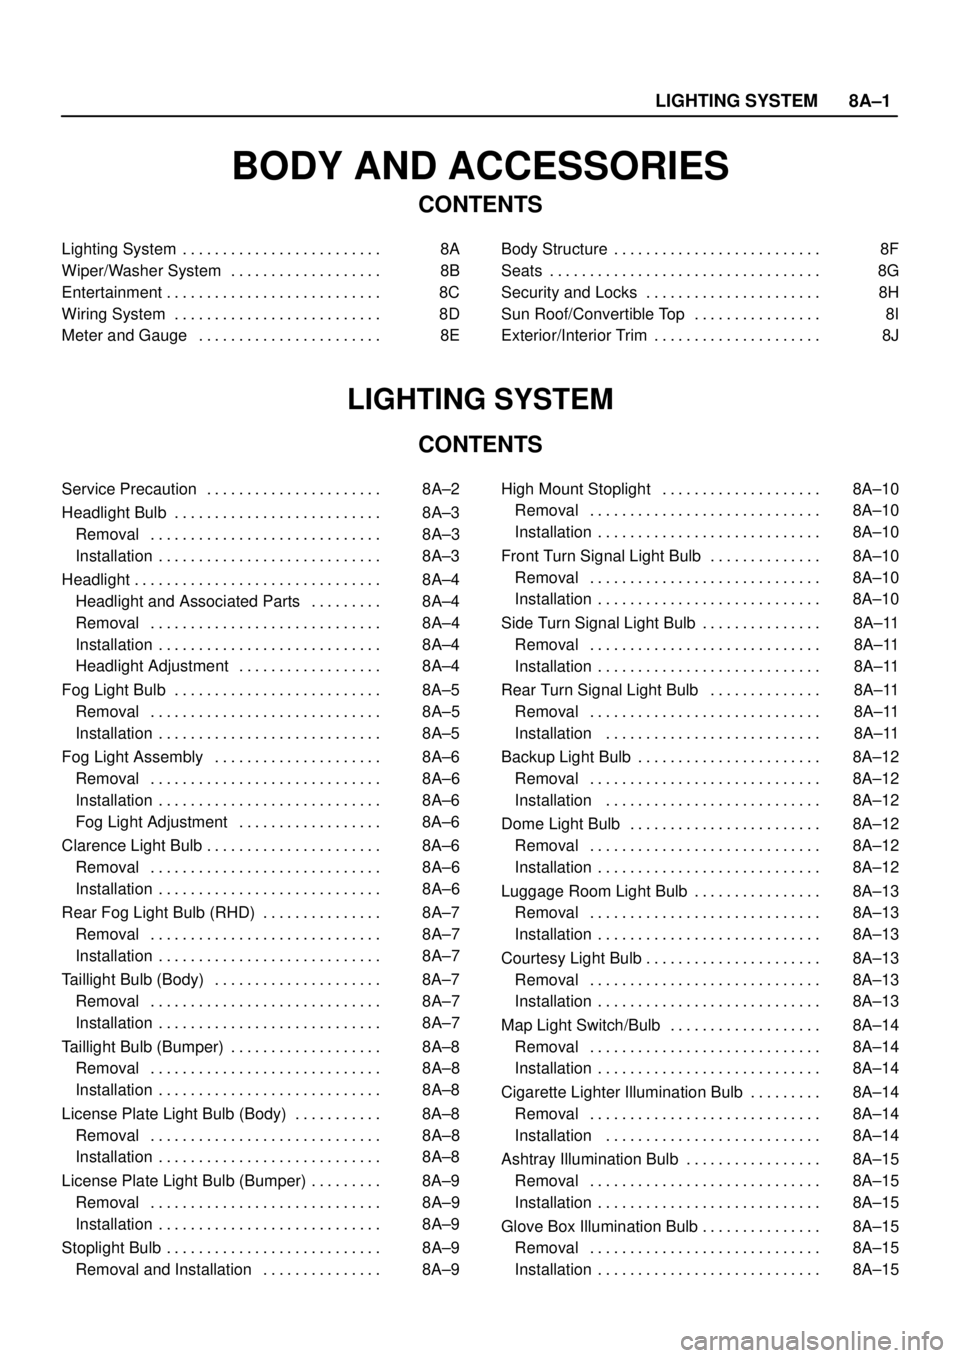 ISUZU TROOPER 1998  Service Repair Manual LIGHTING SYSTEM8A–1
BODY AND ACCESSORIES
CONTENTS
Lighting System 8A. . . . . . . . . . . . . . . . . . . . . . . . . 
Wiper/Washer System 8B. . . . . . . . . . . . . . . . . . . 
Entertainment 8C. 